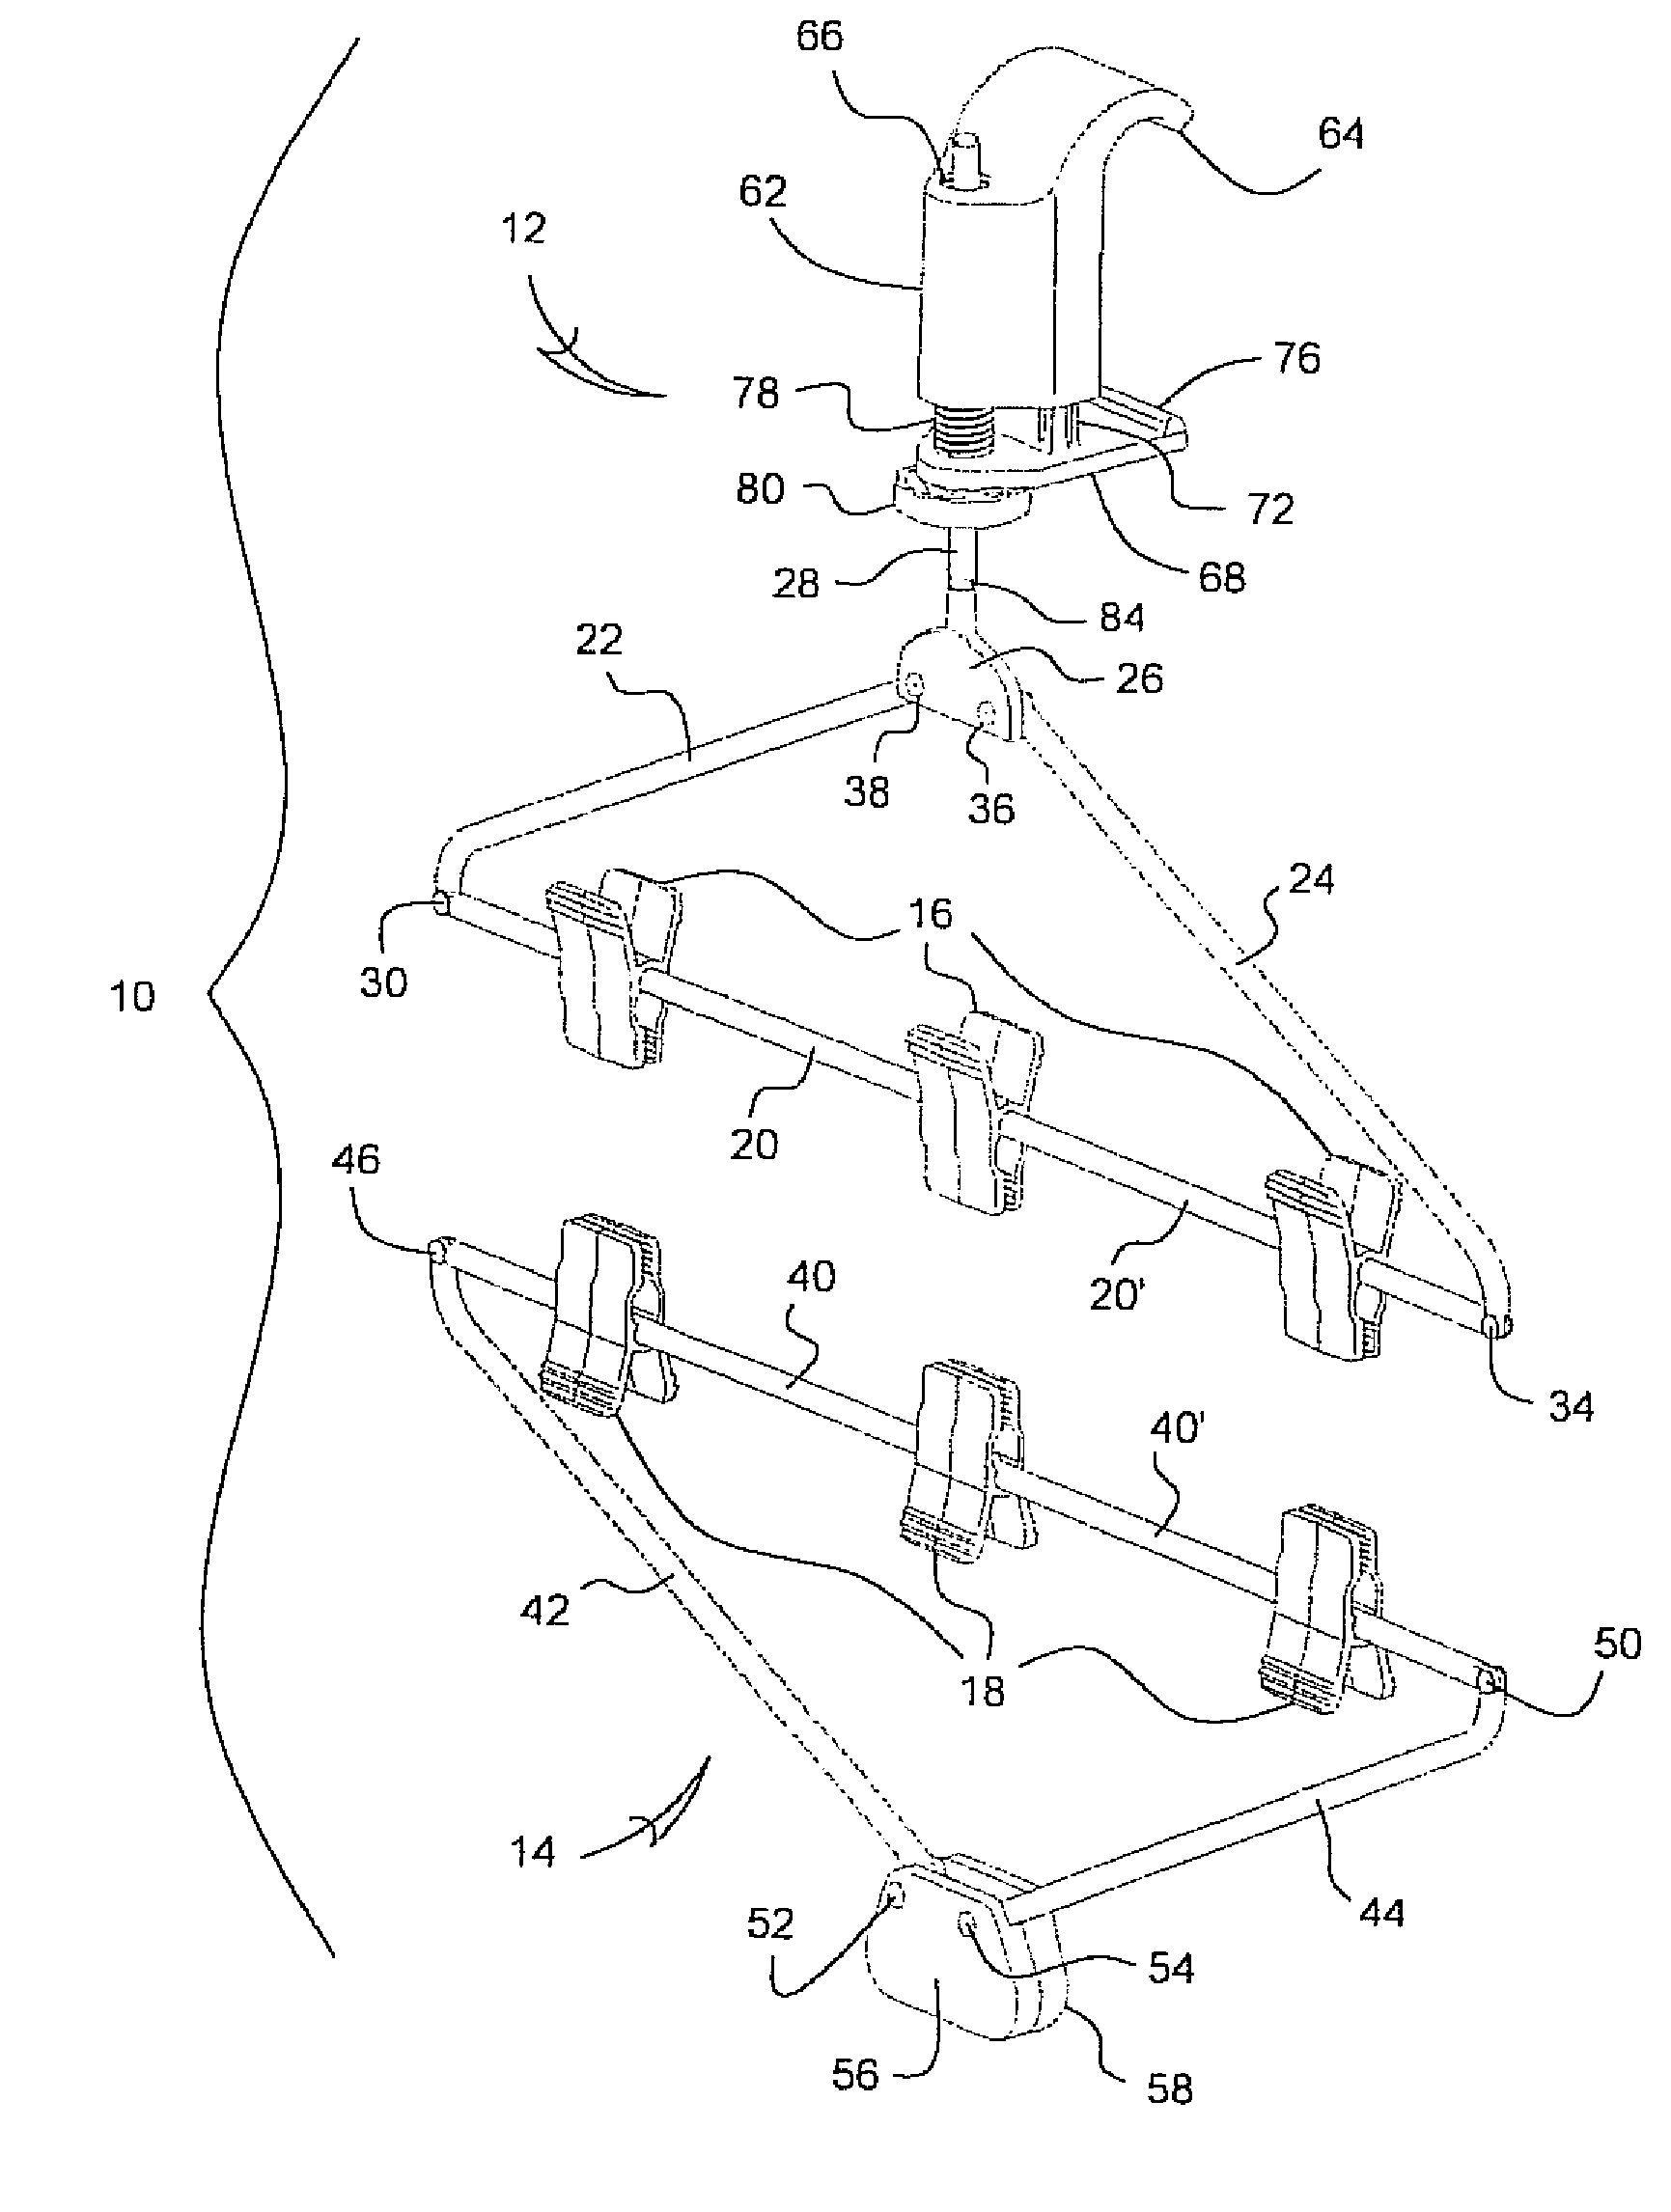 Combination bracket and garment hanger system and assembly mountable to an overhead trim piece associated with a doorway such as for rotatably supporting a garment during steam cleaning